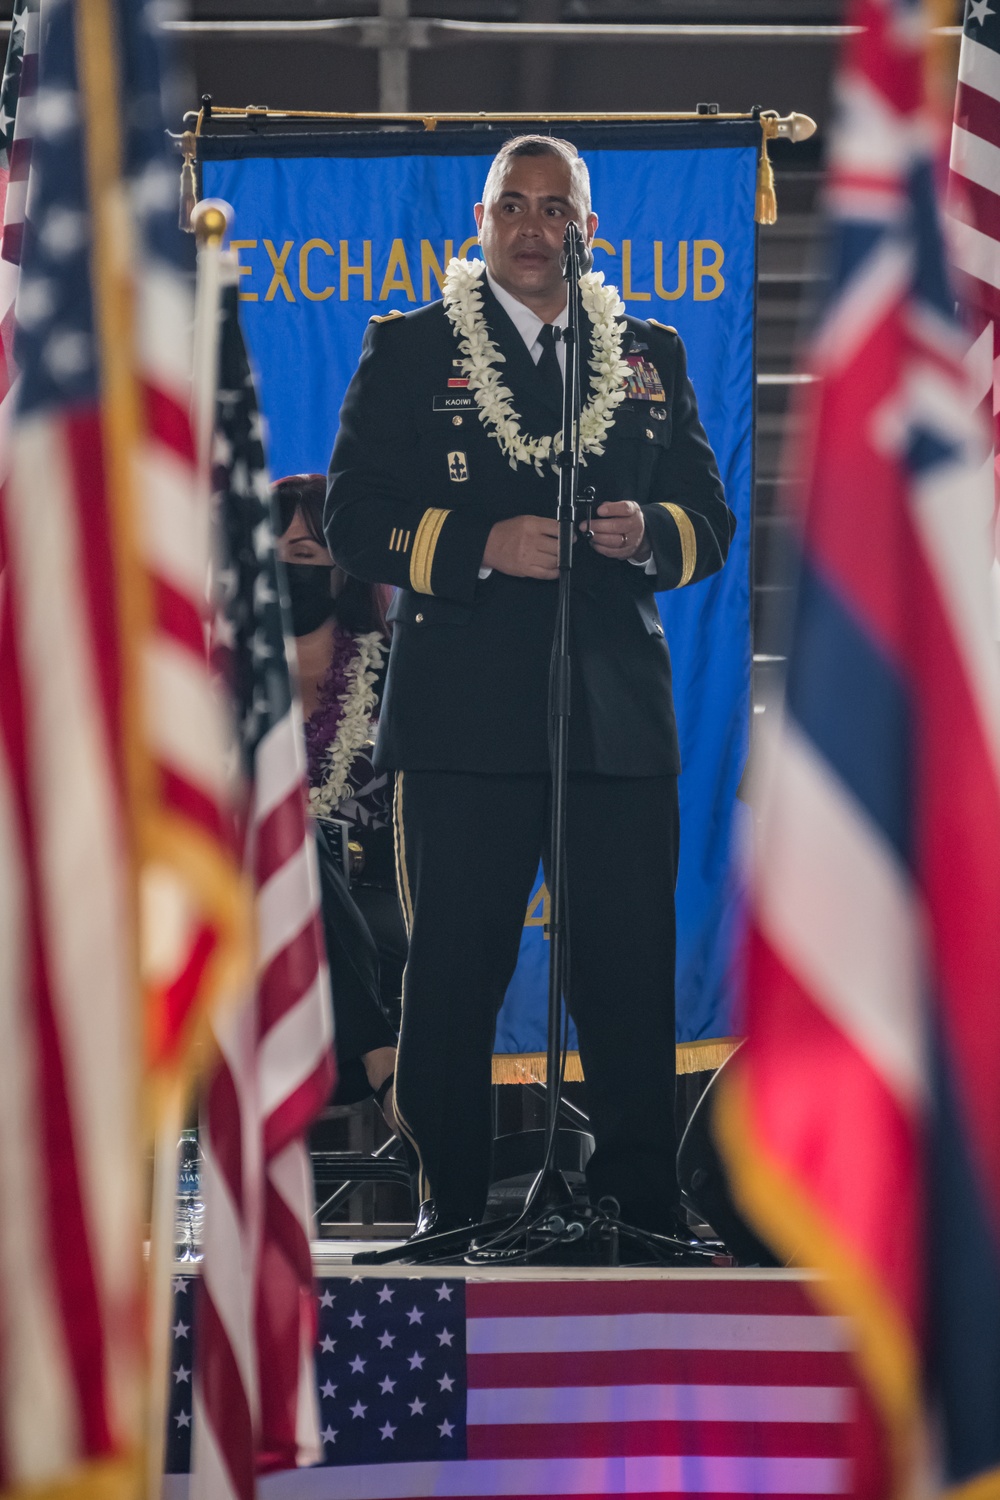 Hawaii County Hometown Heroes Appreciation Ceremony by The Exchange Club of Hilo